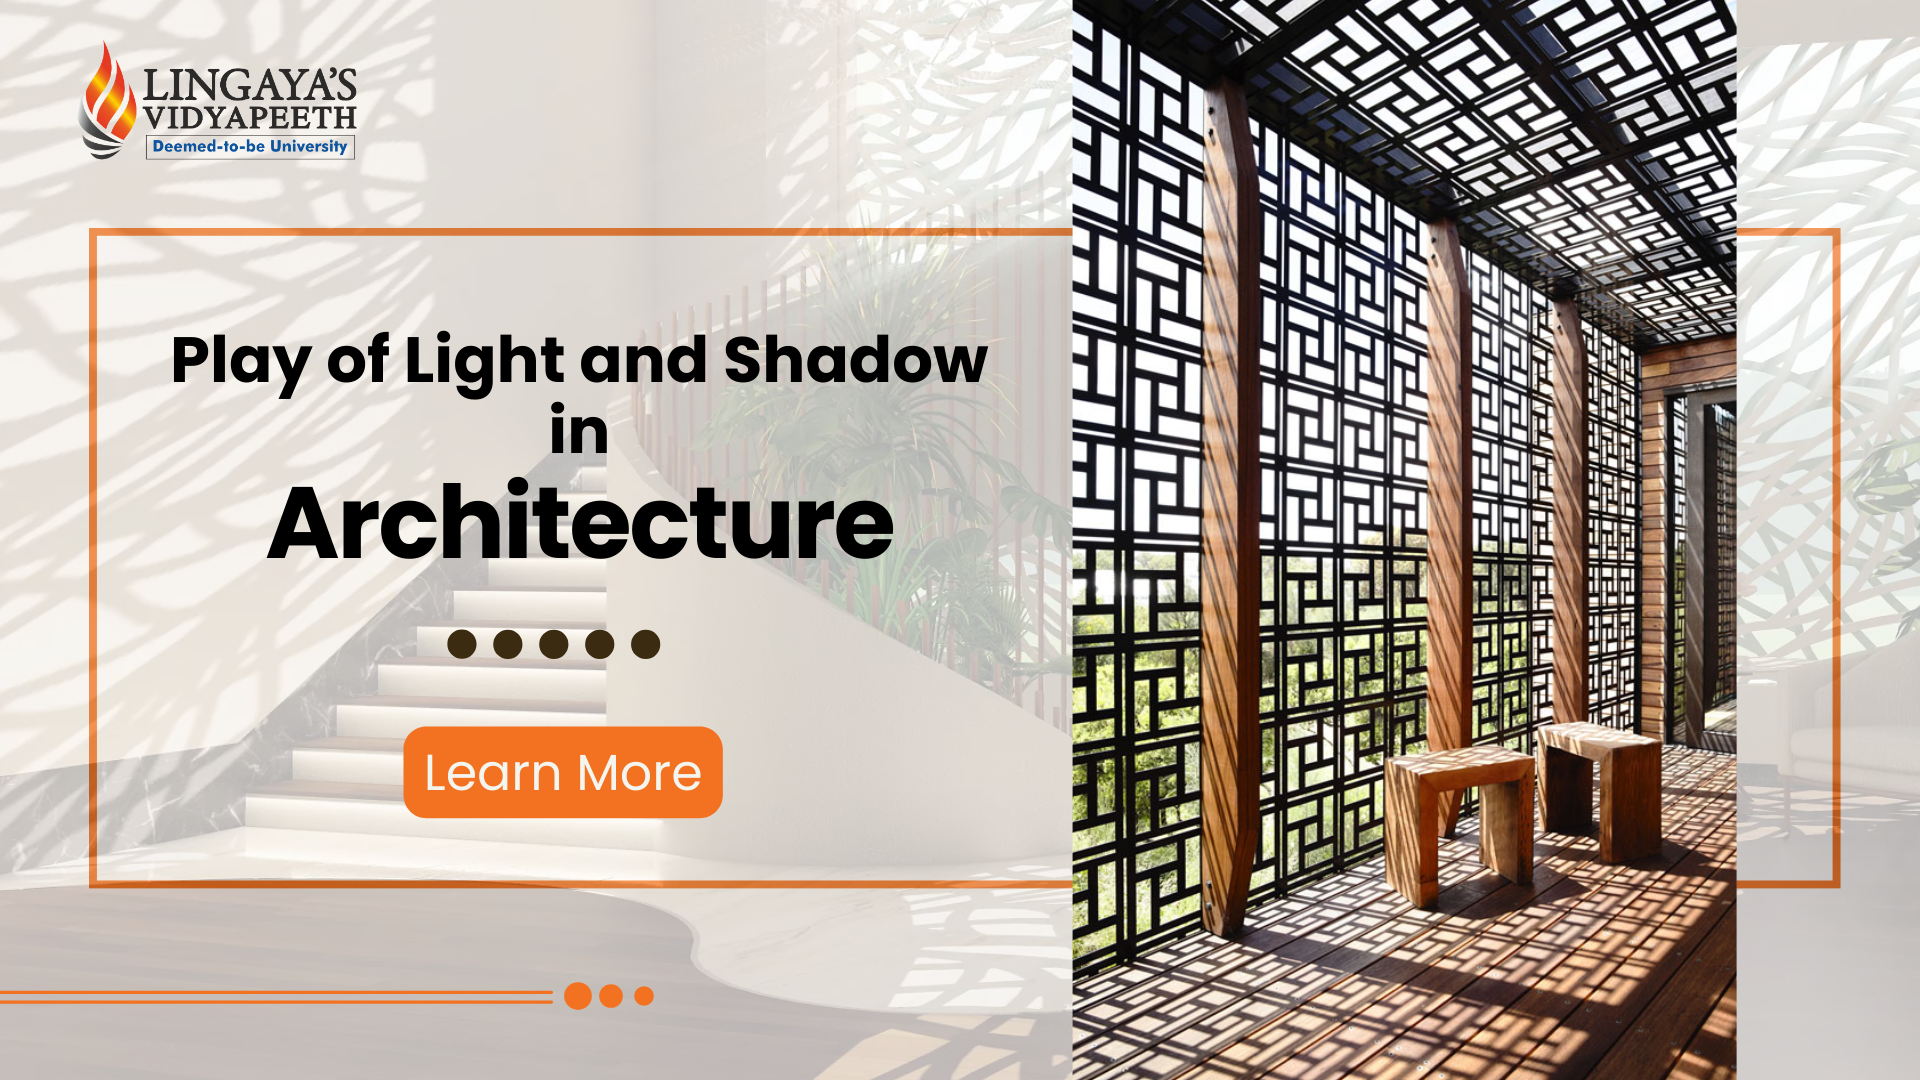 What is Play of Light and Shadow in Architecture?